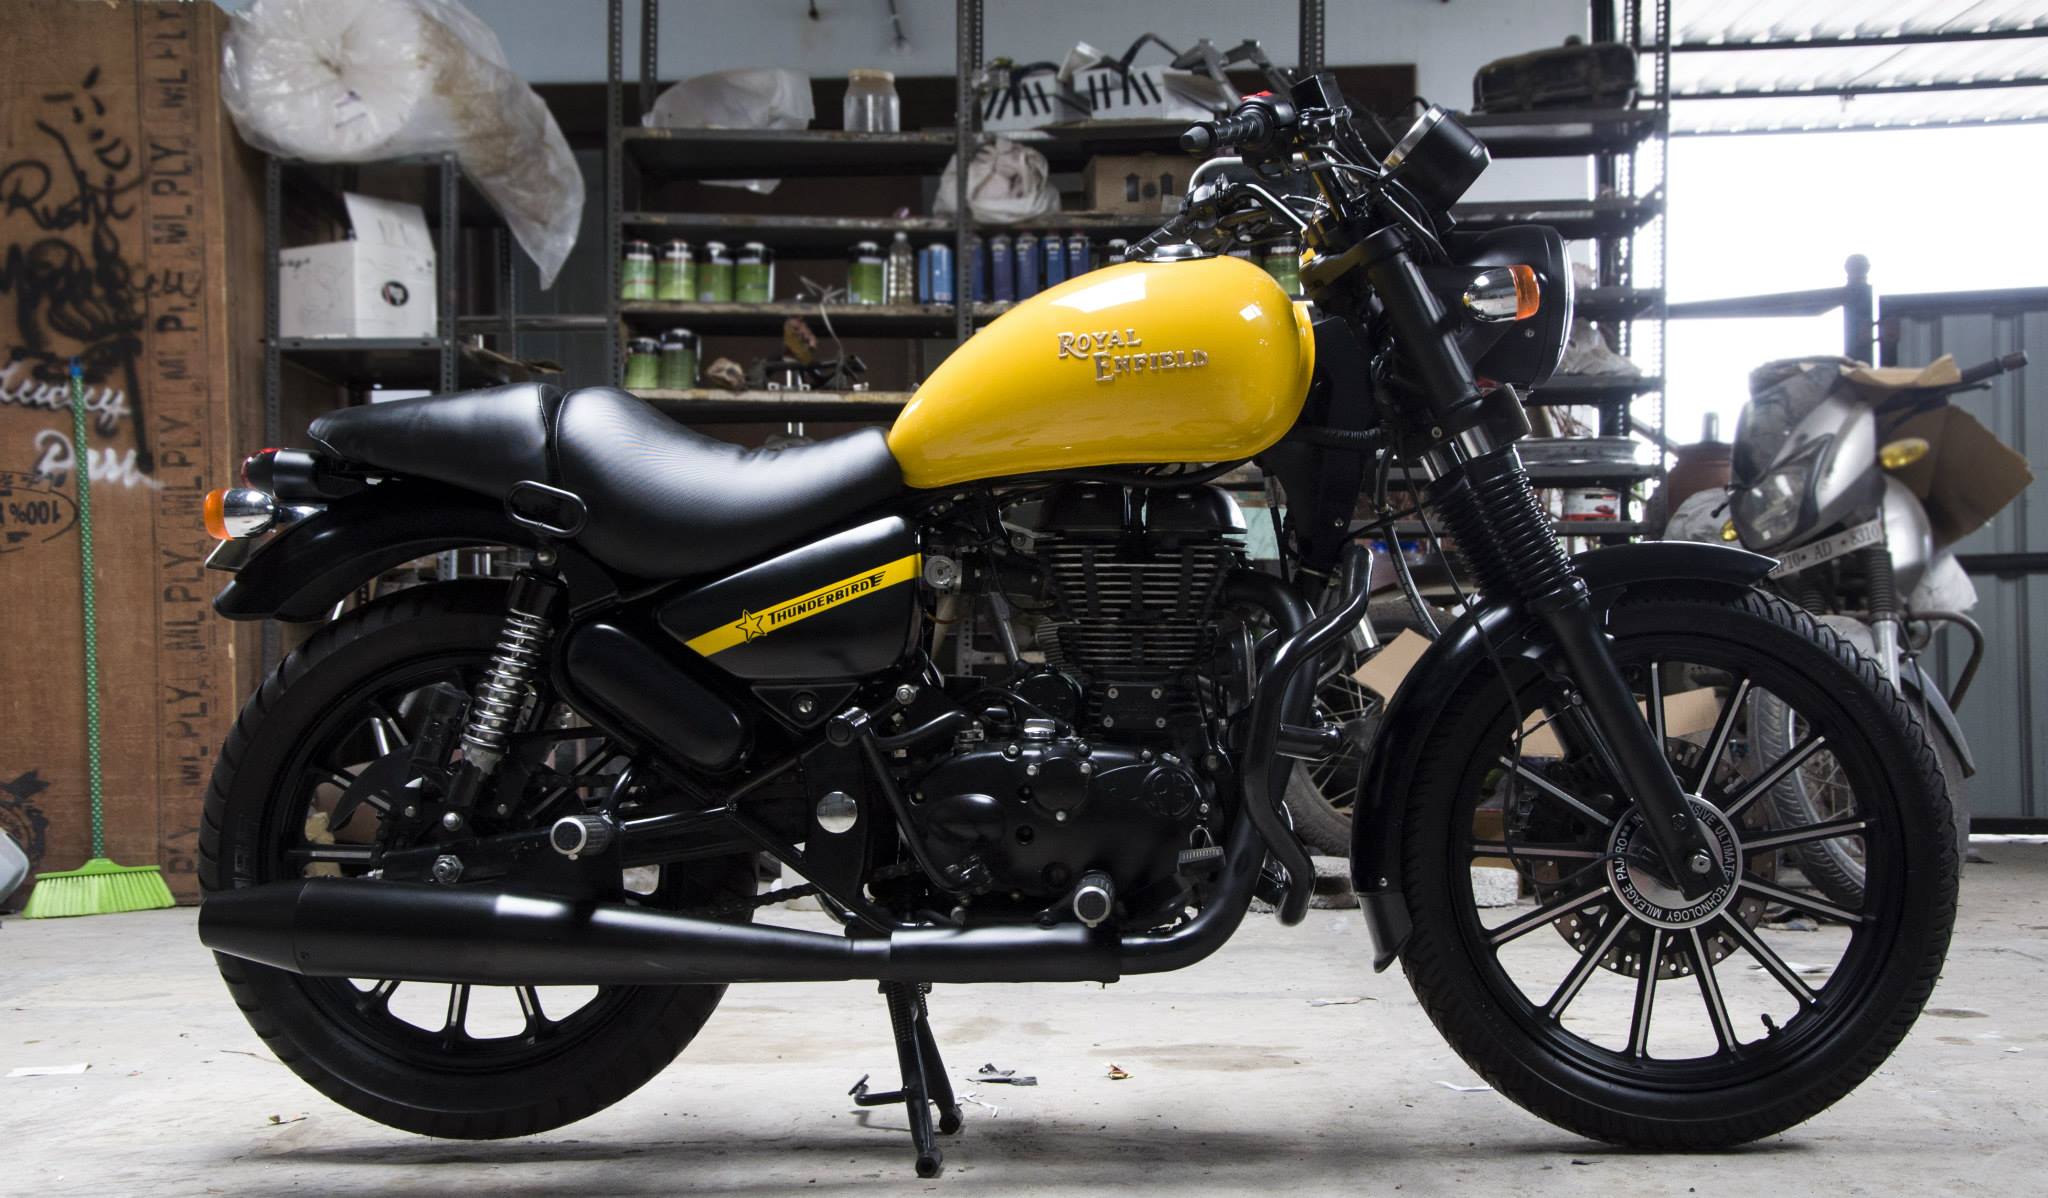 You Will Fall in Love with This Royal Enfield Thunderbird 500